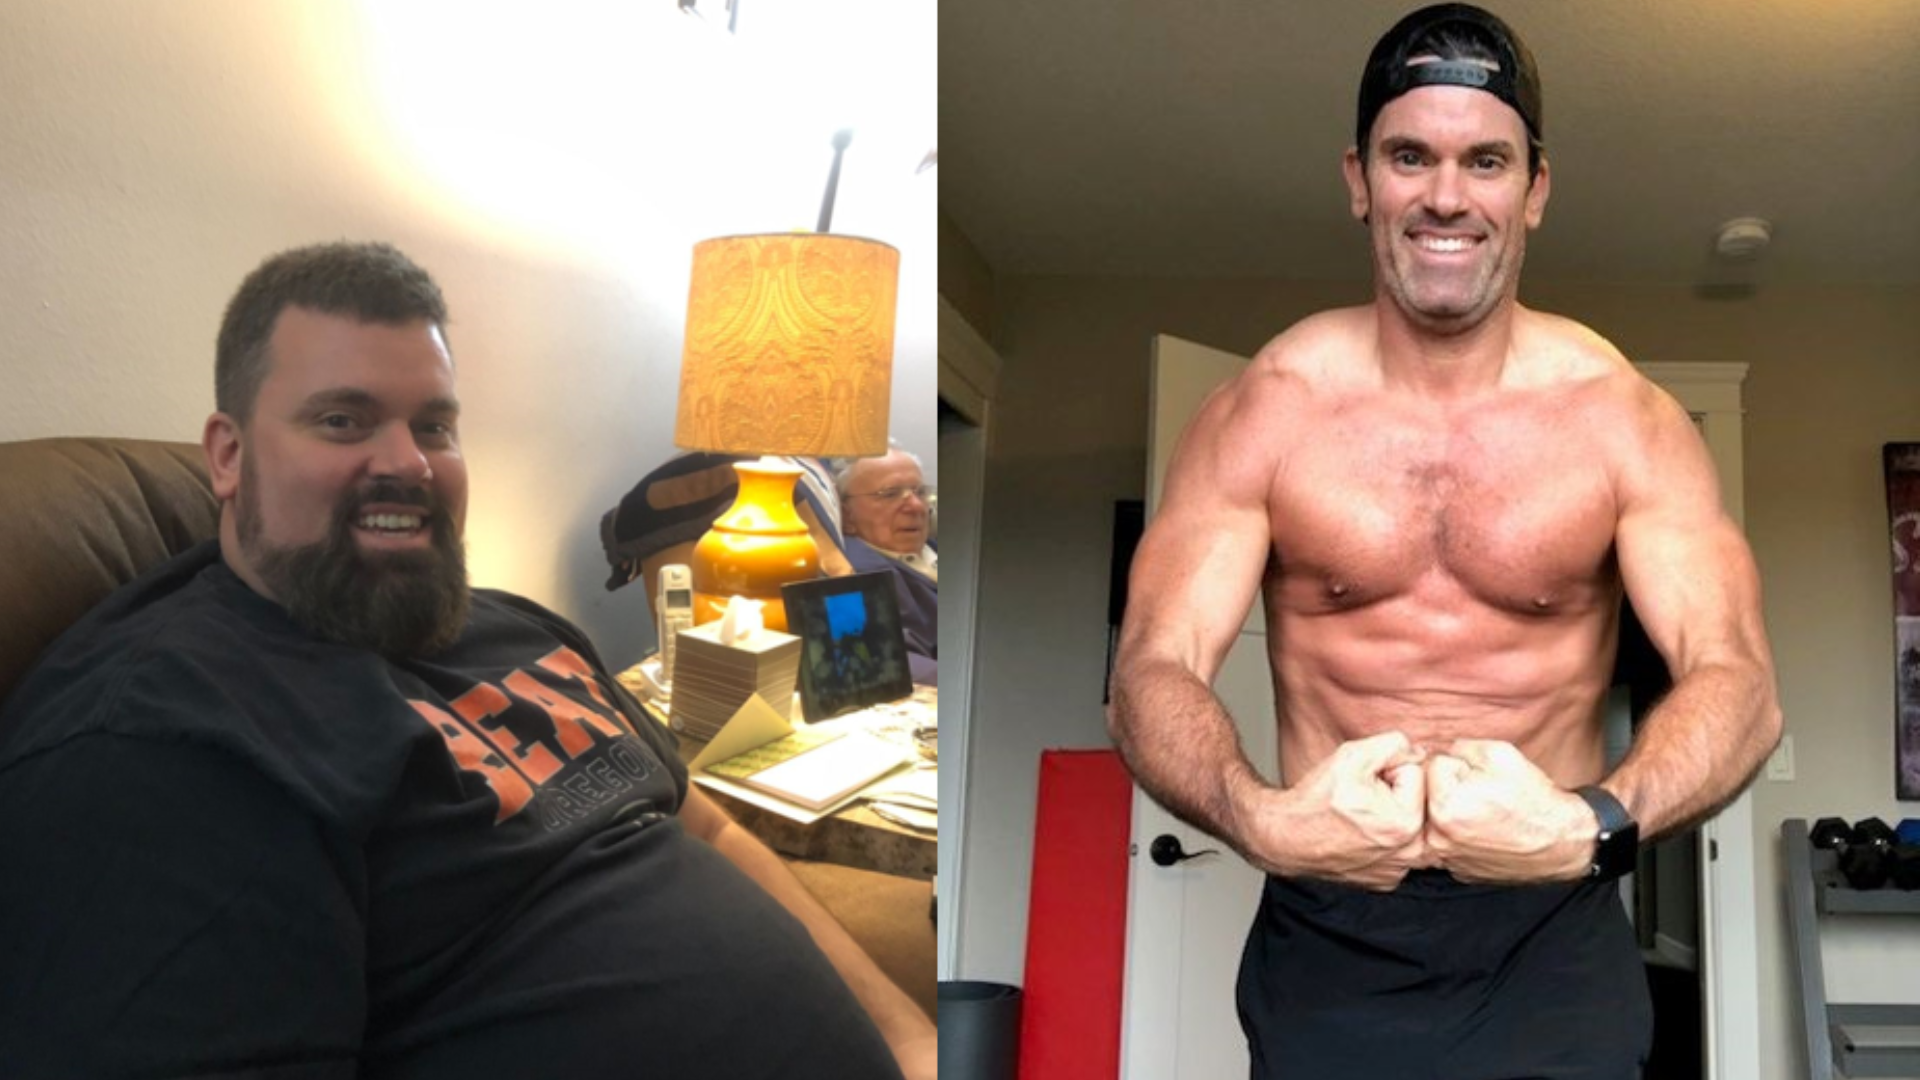 Wade Jackson is one of four male finalists in this year's Beachbody Challenge after losing over 120 pounds.